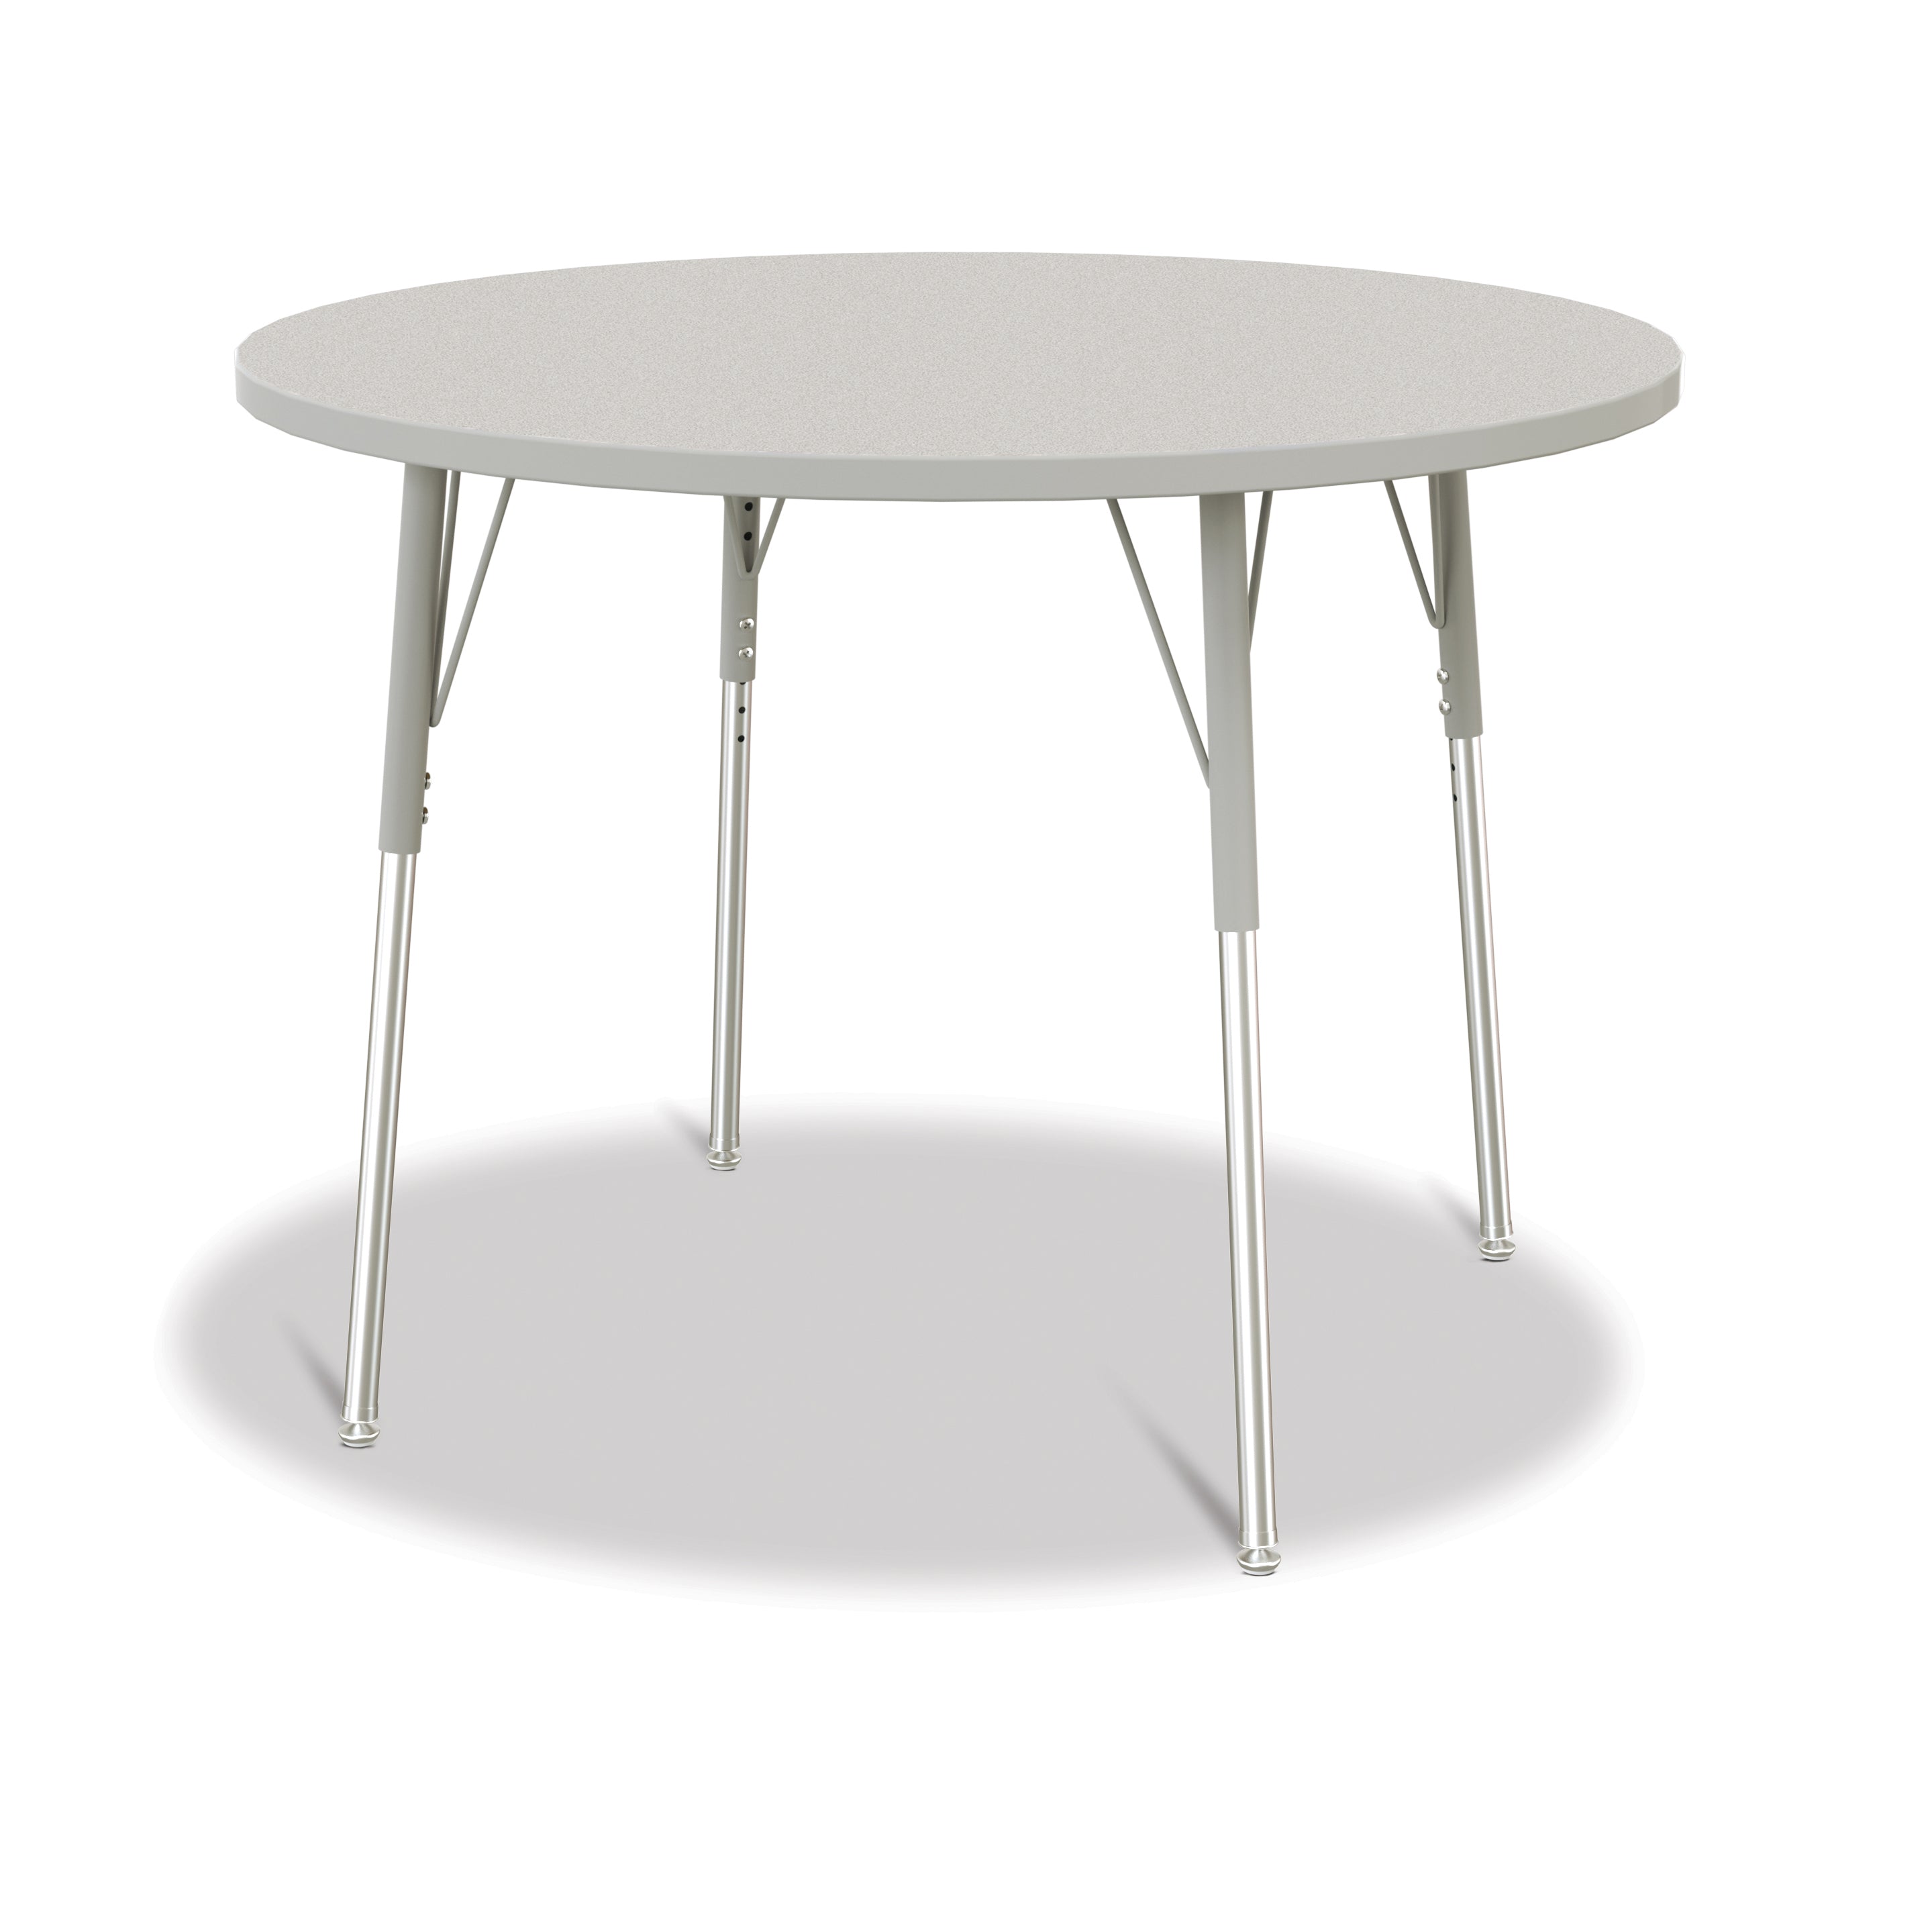 6468JCA000, Berries Round Activity Table - 42" Diameter, A-height - Freckled Gray/Gray/Gray